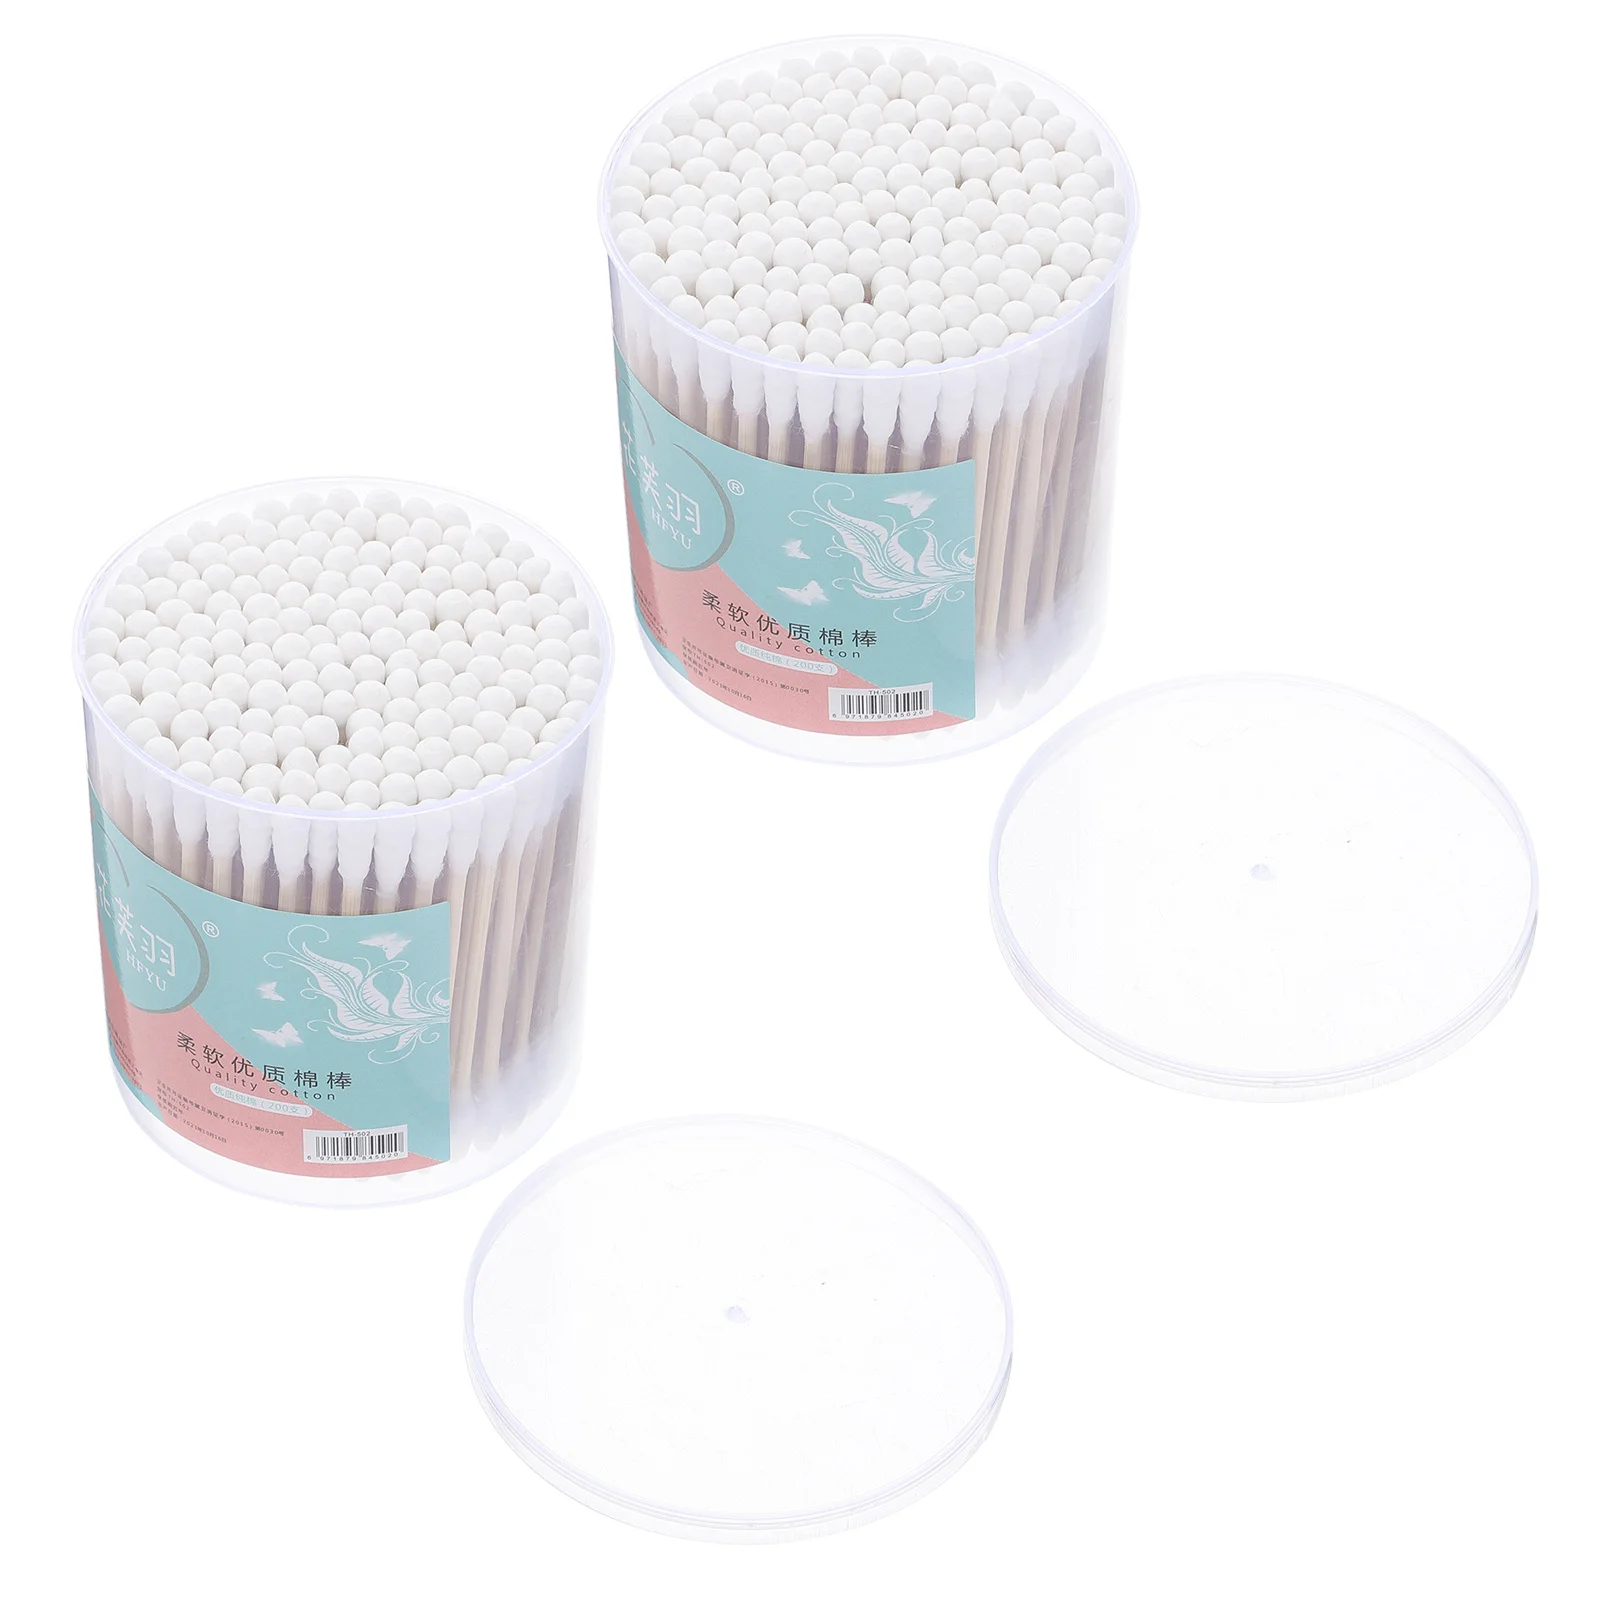 Baby Cotton Swabs 2 Box 400Pcs Baby Safety Swabs Double Spiral Tips Cotton Swabs Paper Sticks Natural Cotton Buds Ear 4 boxes of double headed cotton swabs earpick cotton swabs ear wax cleaner